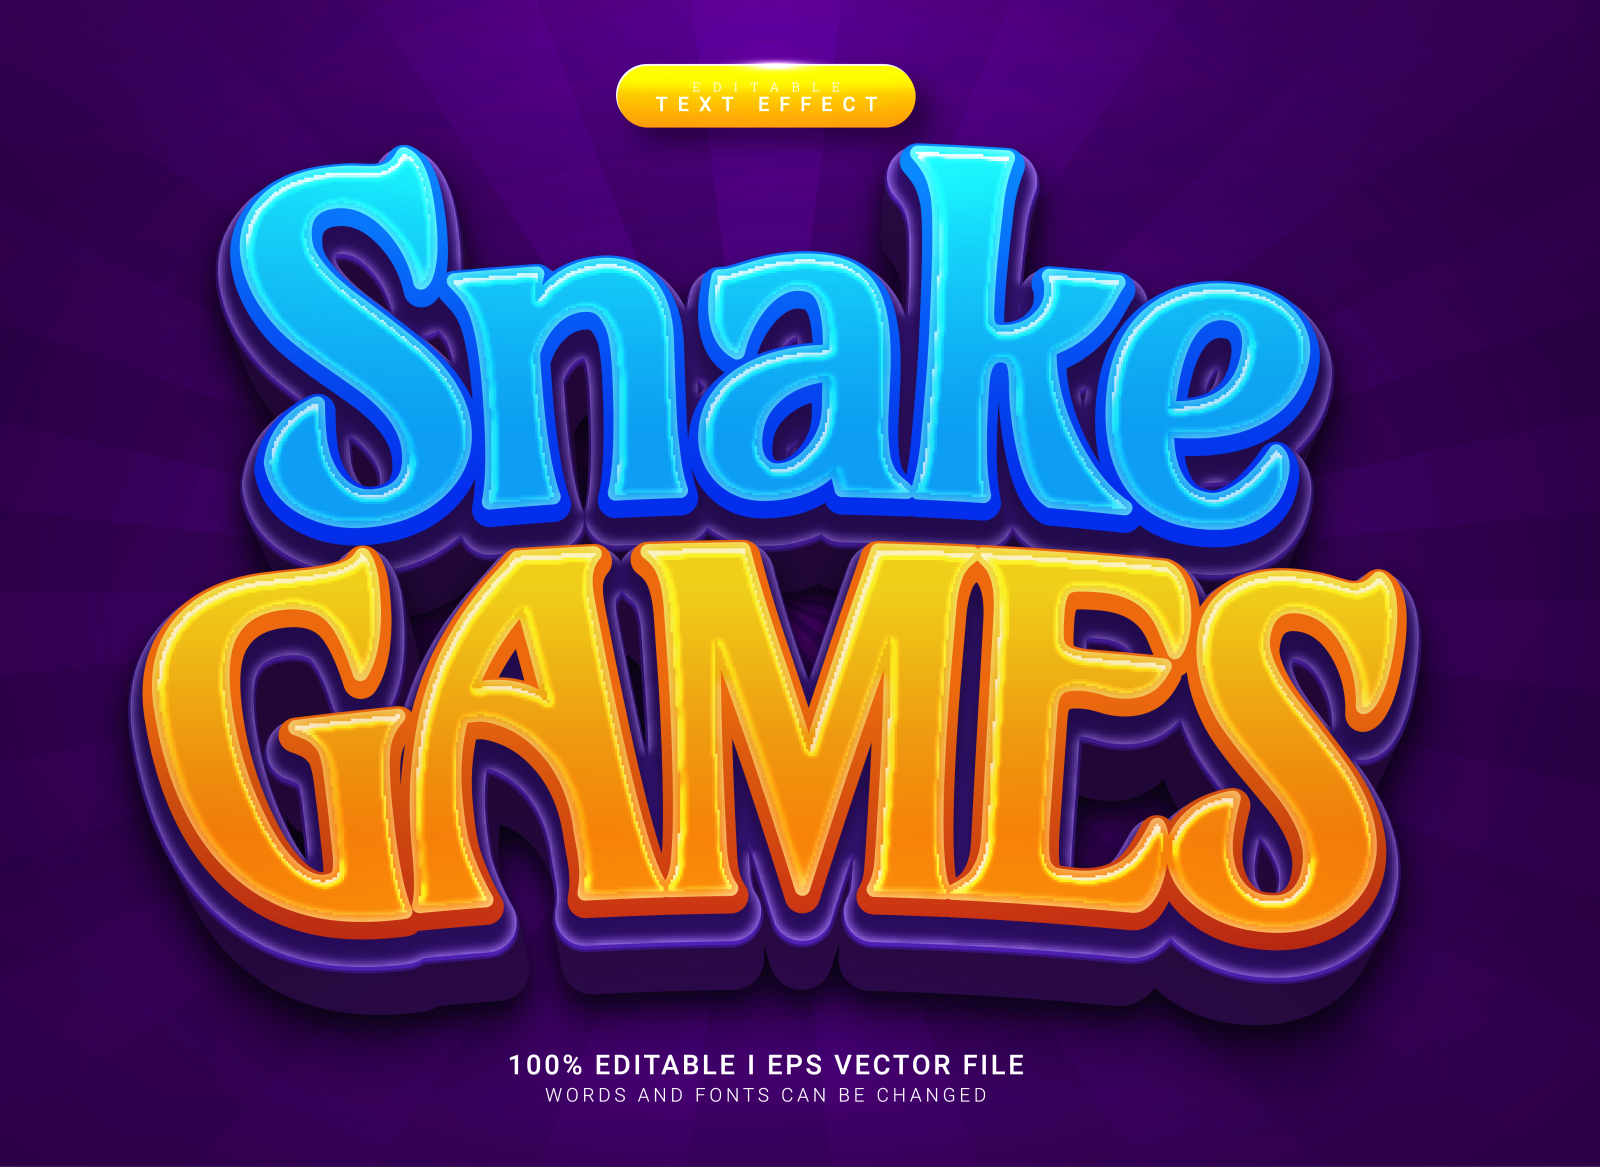 100+] Snake Game Pictures